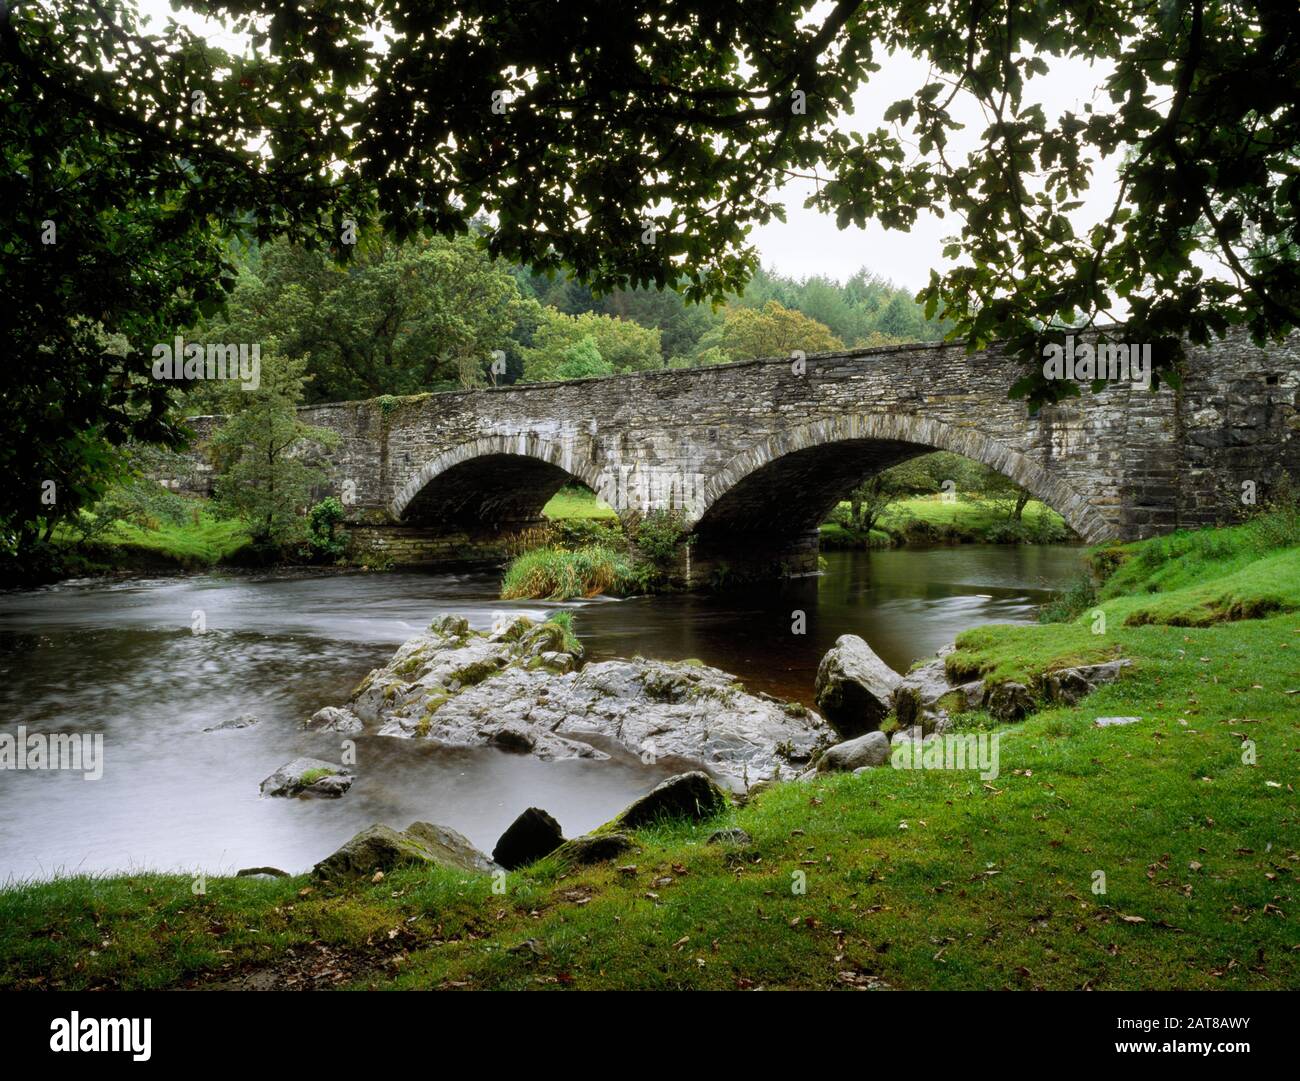 Pont Ty-Hyll or Ty Hyll Bridge, River Llugwy, Capel Curig, Conwy, North Wales. Built by Thomas Telford as part of his London to Holyhead road. C19th Stock Photo